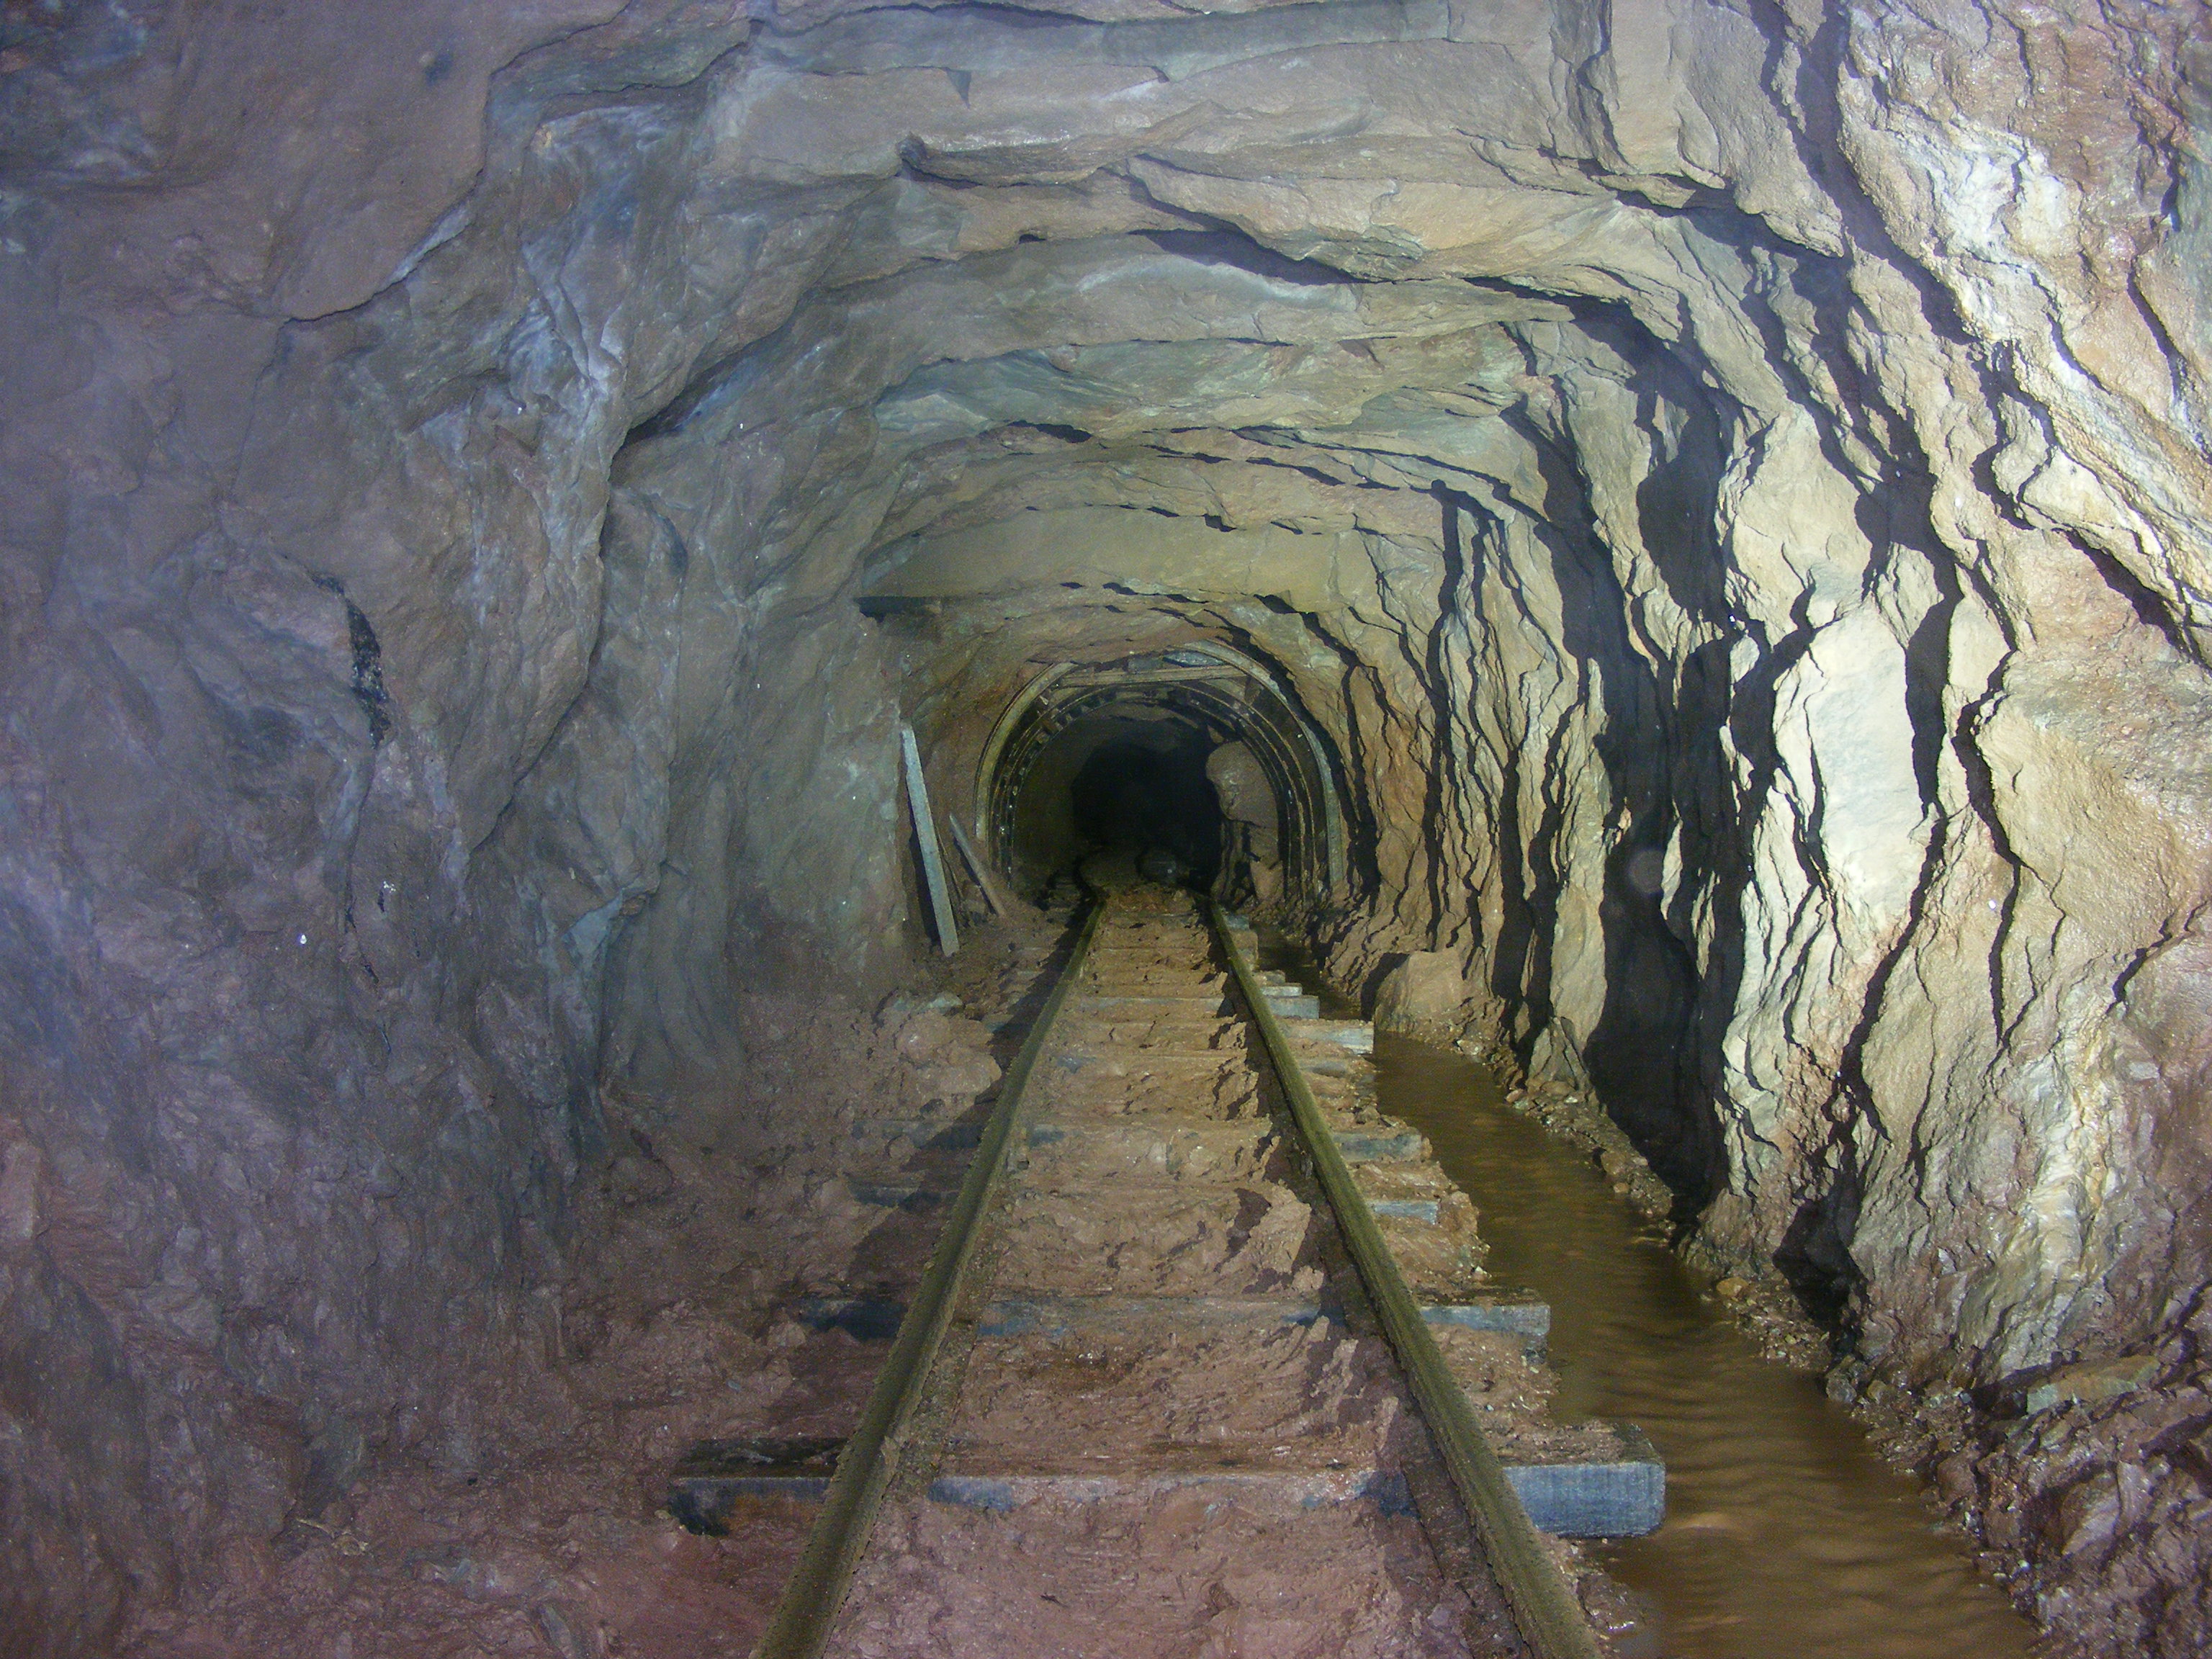 A view looking into the mine